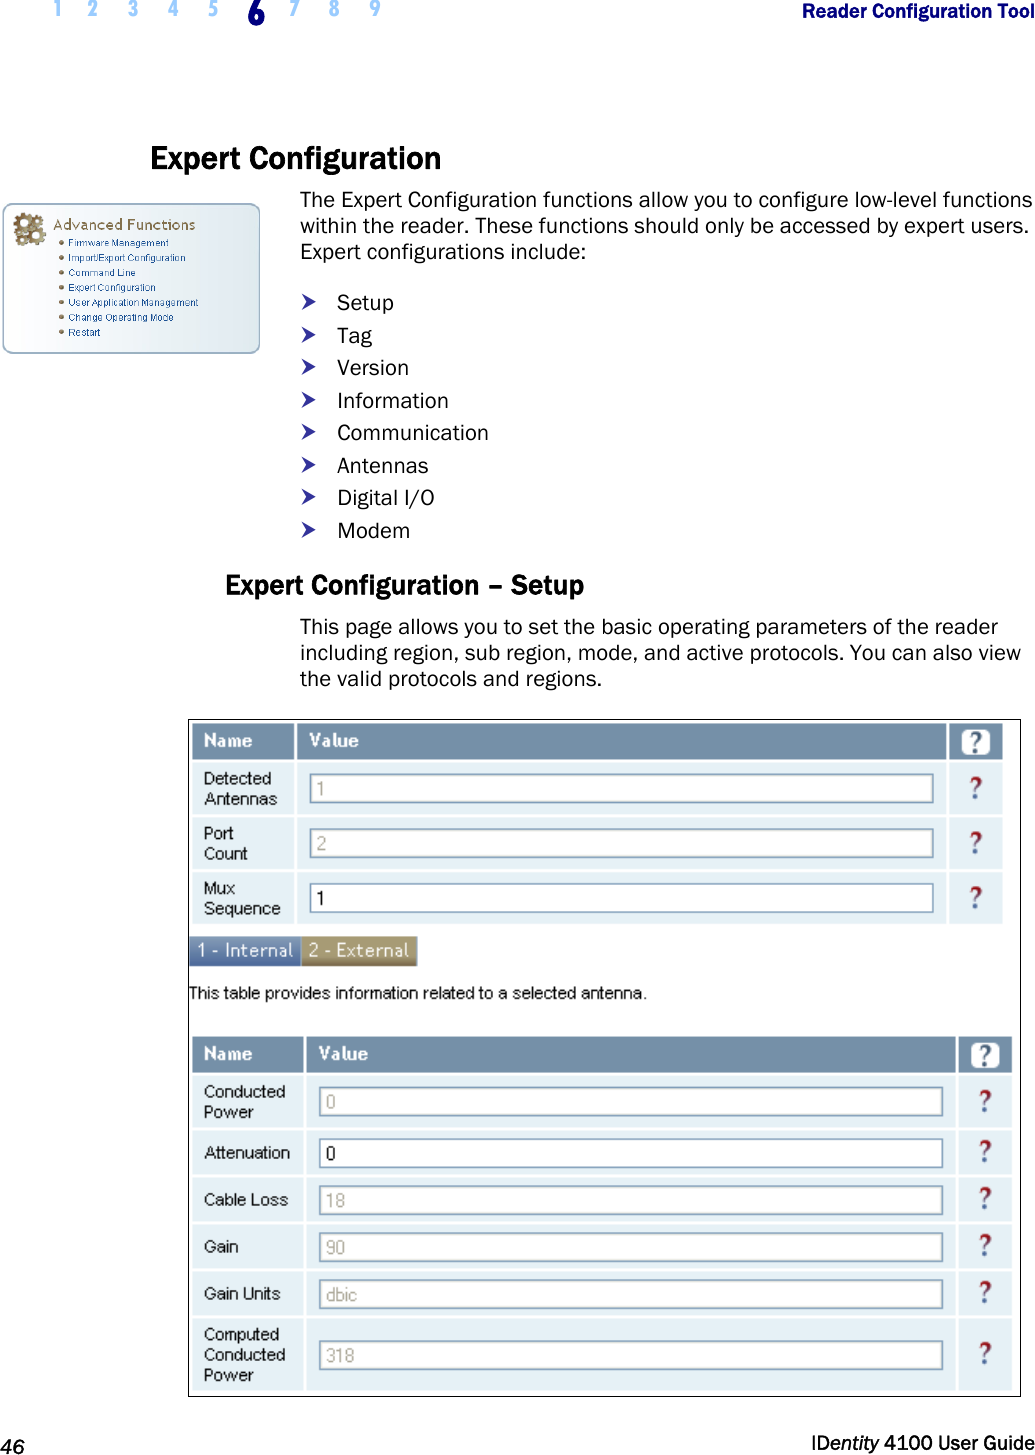  1 2  3  4  5 6 7 8 9       Reader Configuration Tool   46  IDentity 4100 User Guide  Expert Configuration The Expert Configuration functions allow you to configure low-level functions within the reader. These functions should only be accessed by expert users. Expert configurations include: h Setup h Tag h Version h Information h Communication h Antennas h Digital I/O h Modem Expert Configuration – Setup This page allows you to set the basic operating parameters of the reader including region, sub region, mode, and active protocols. You can also view the valid protocols and regions.  